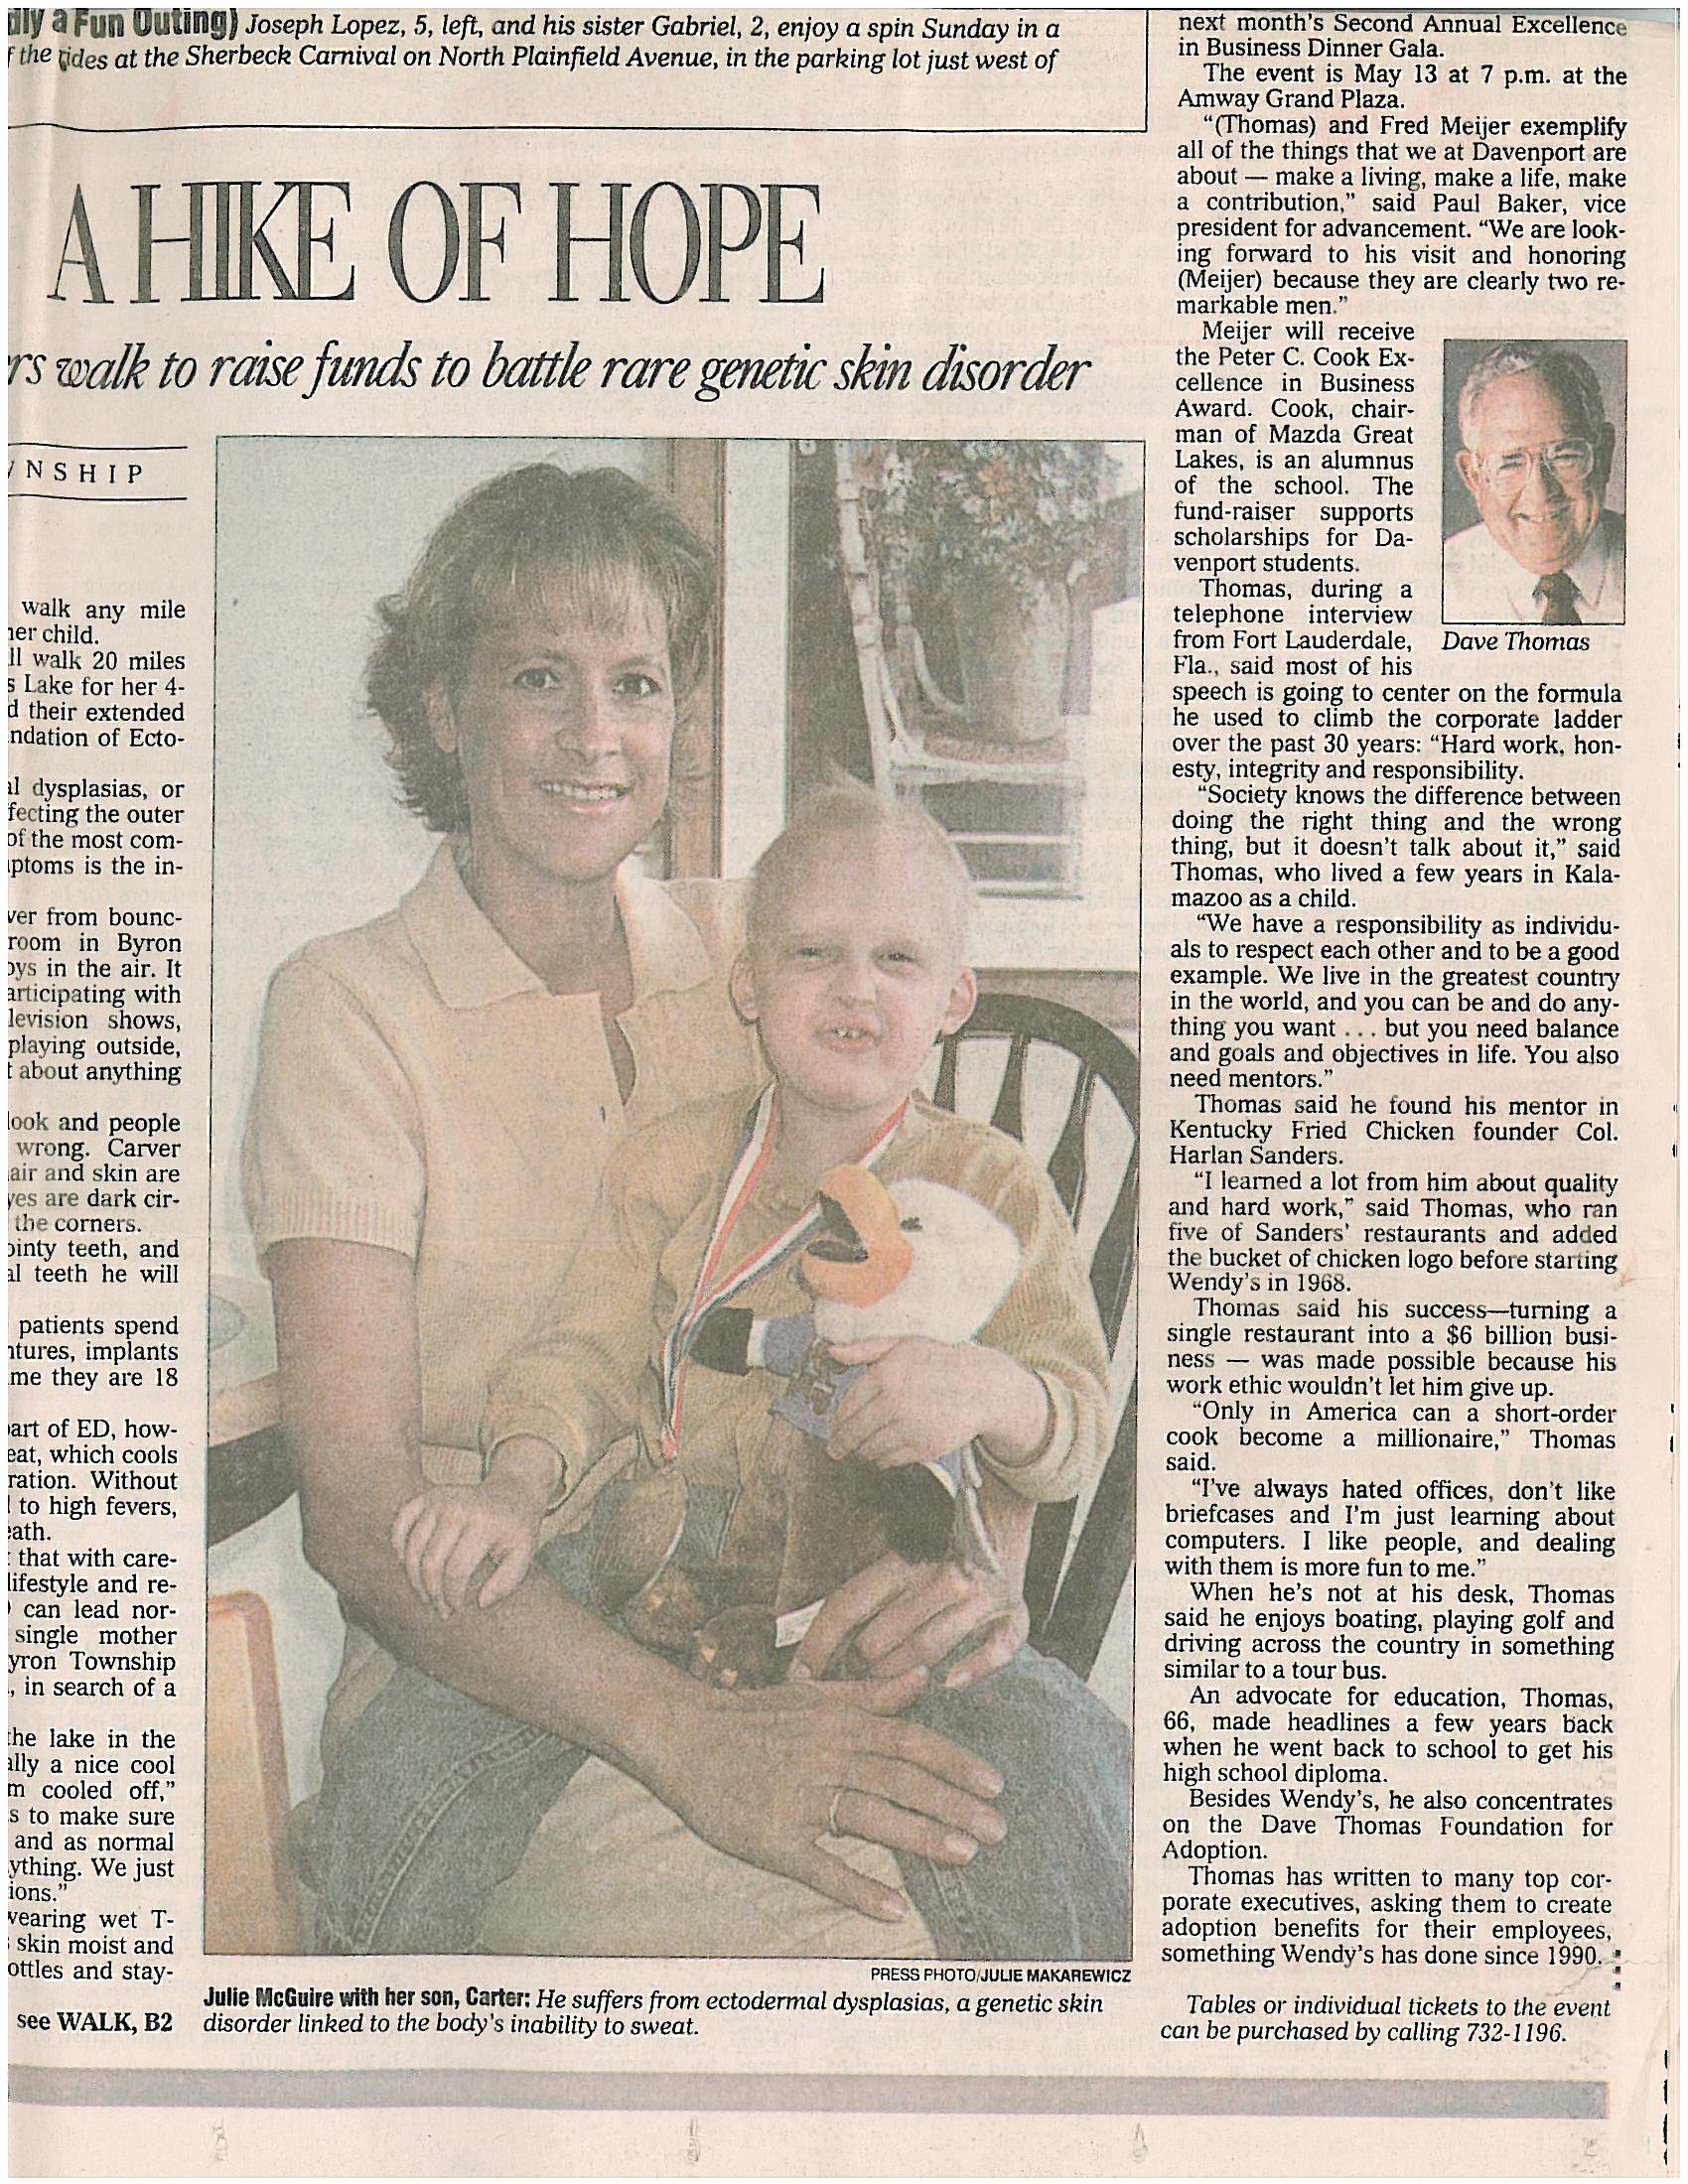 One of several newspaper articles featuring Julie and Carver